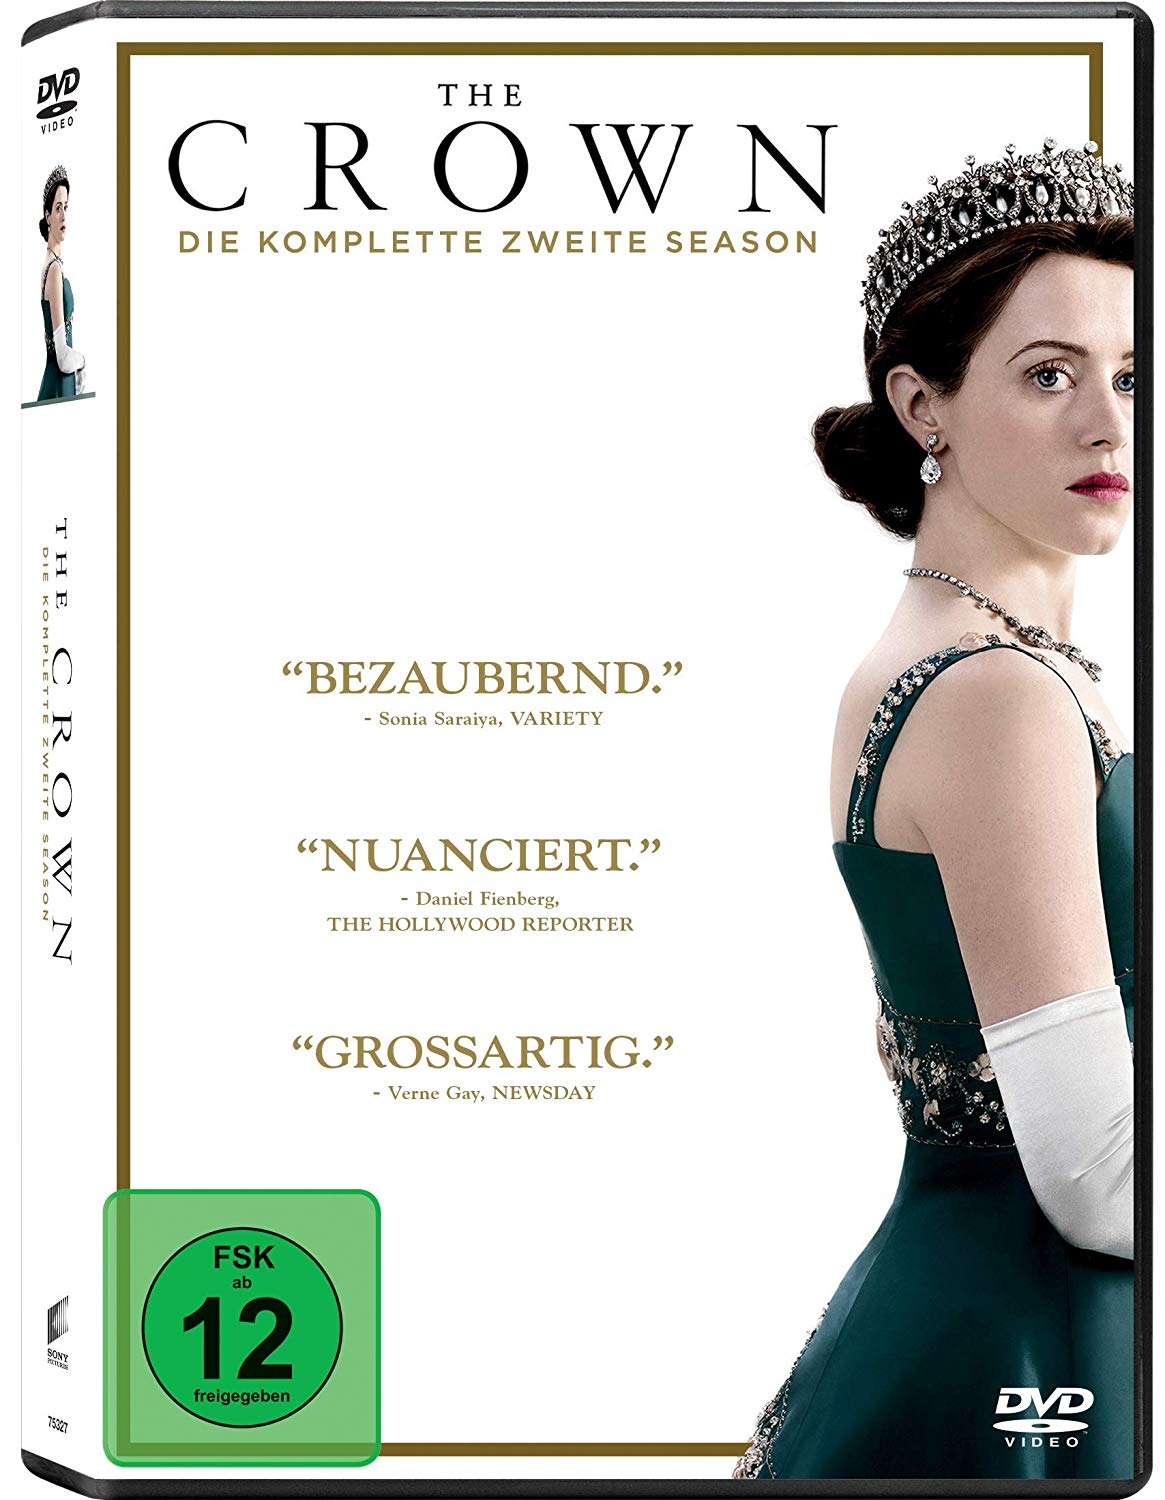 dvd 10 18 The Crown 2